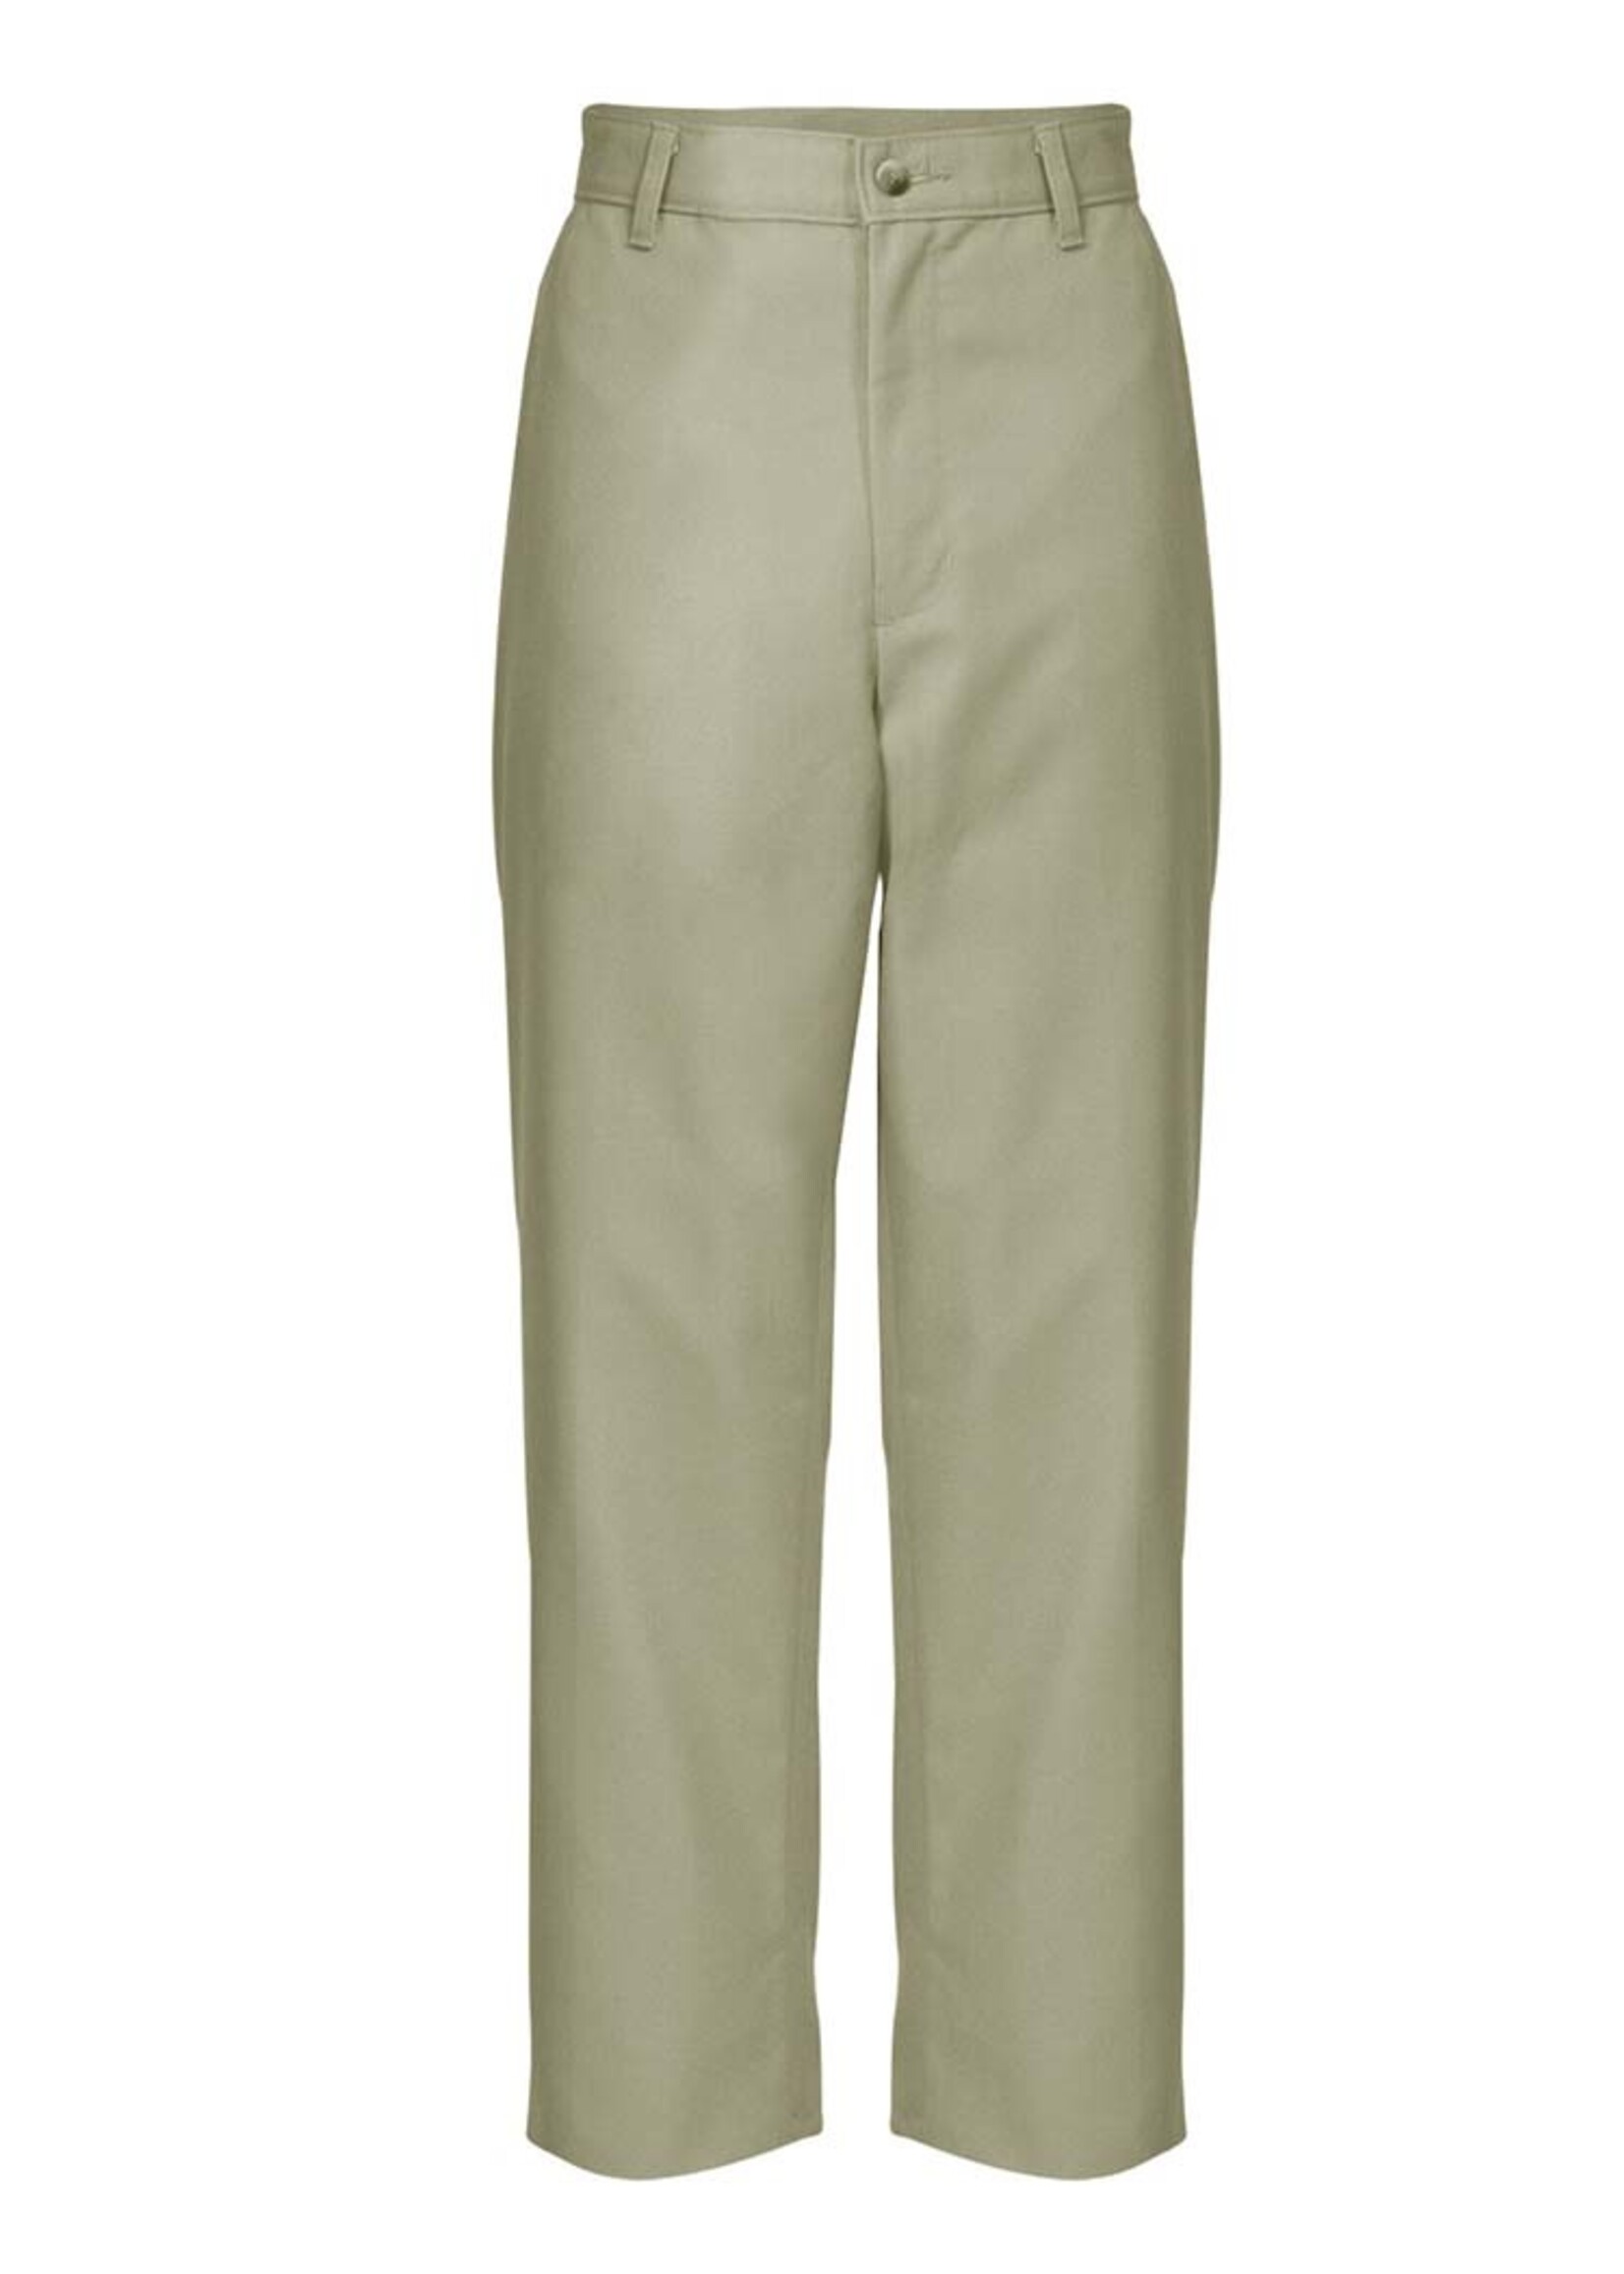 Mens Flat Front Pants (KN) with logo